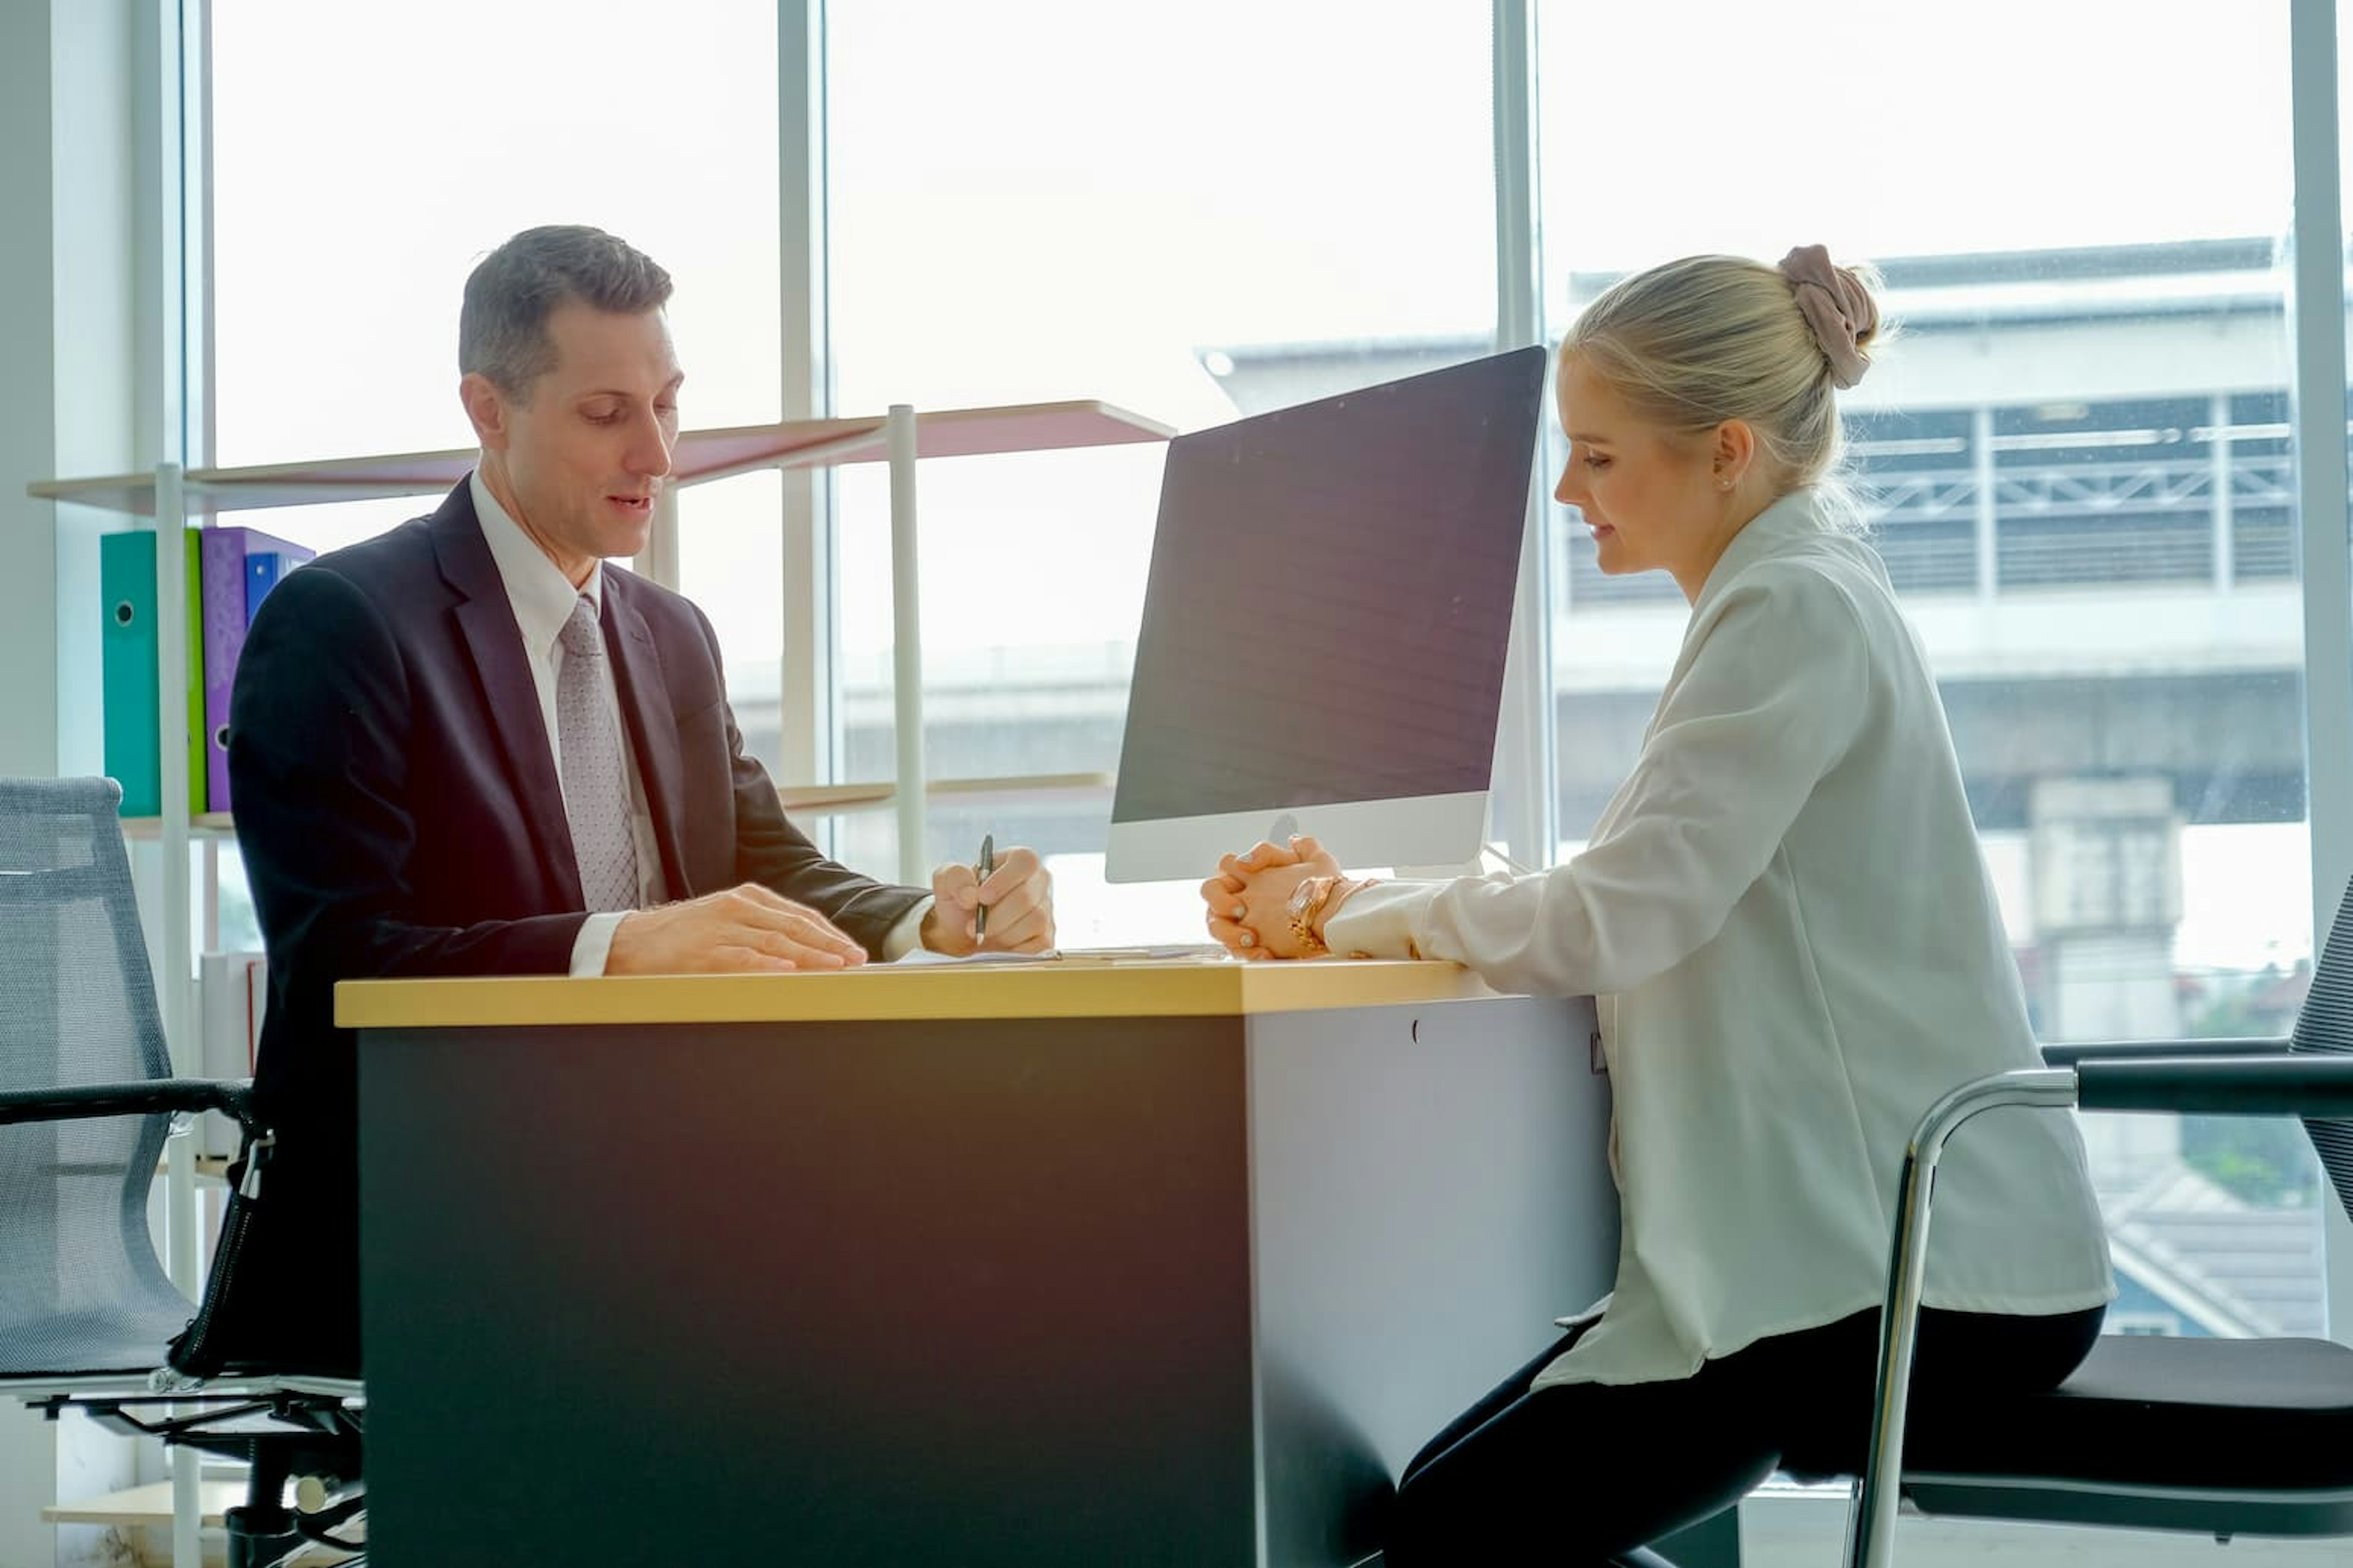 Man and woman sitting across each other at a desk